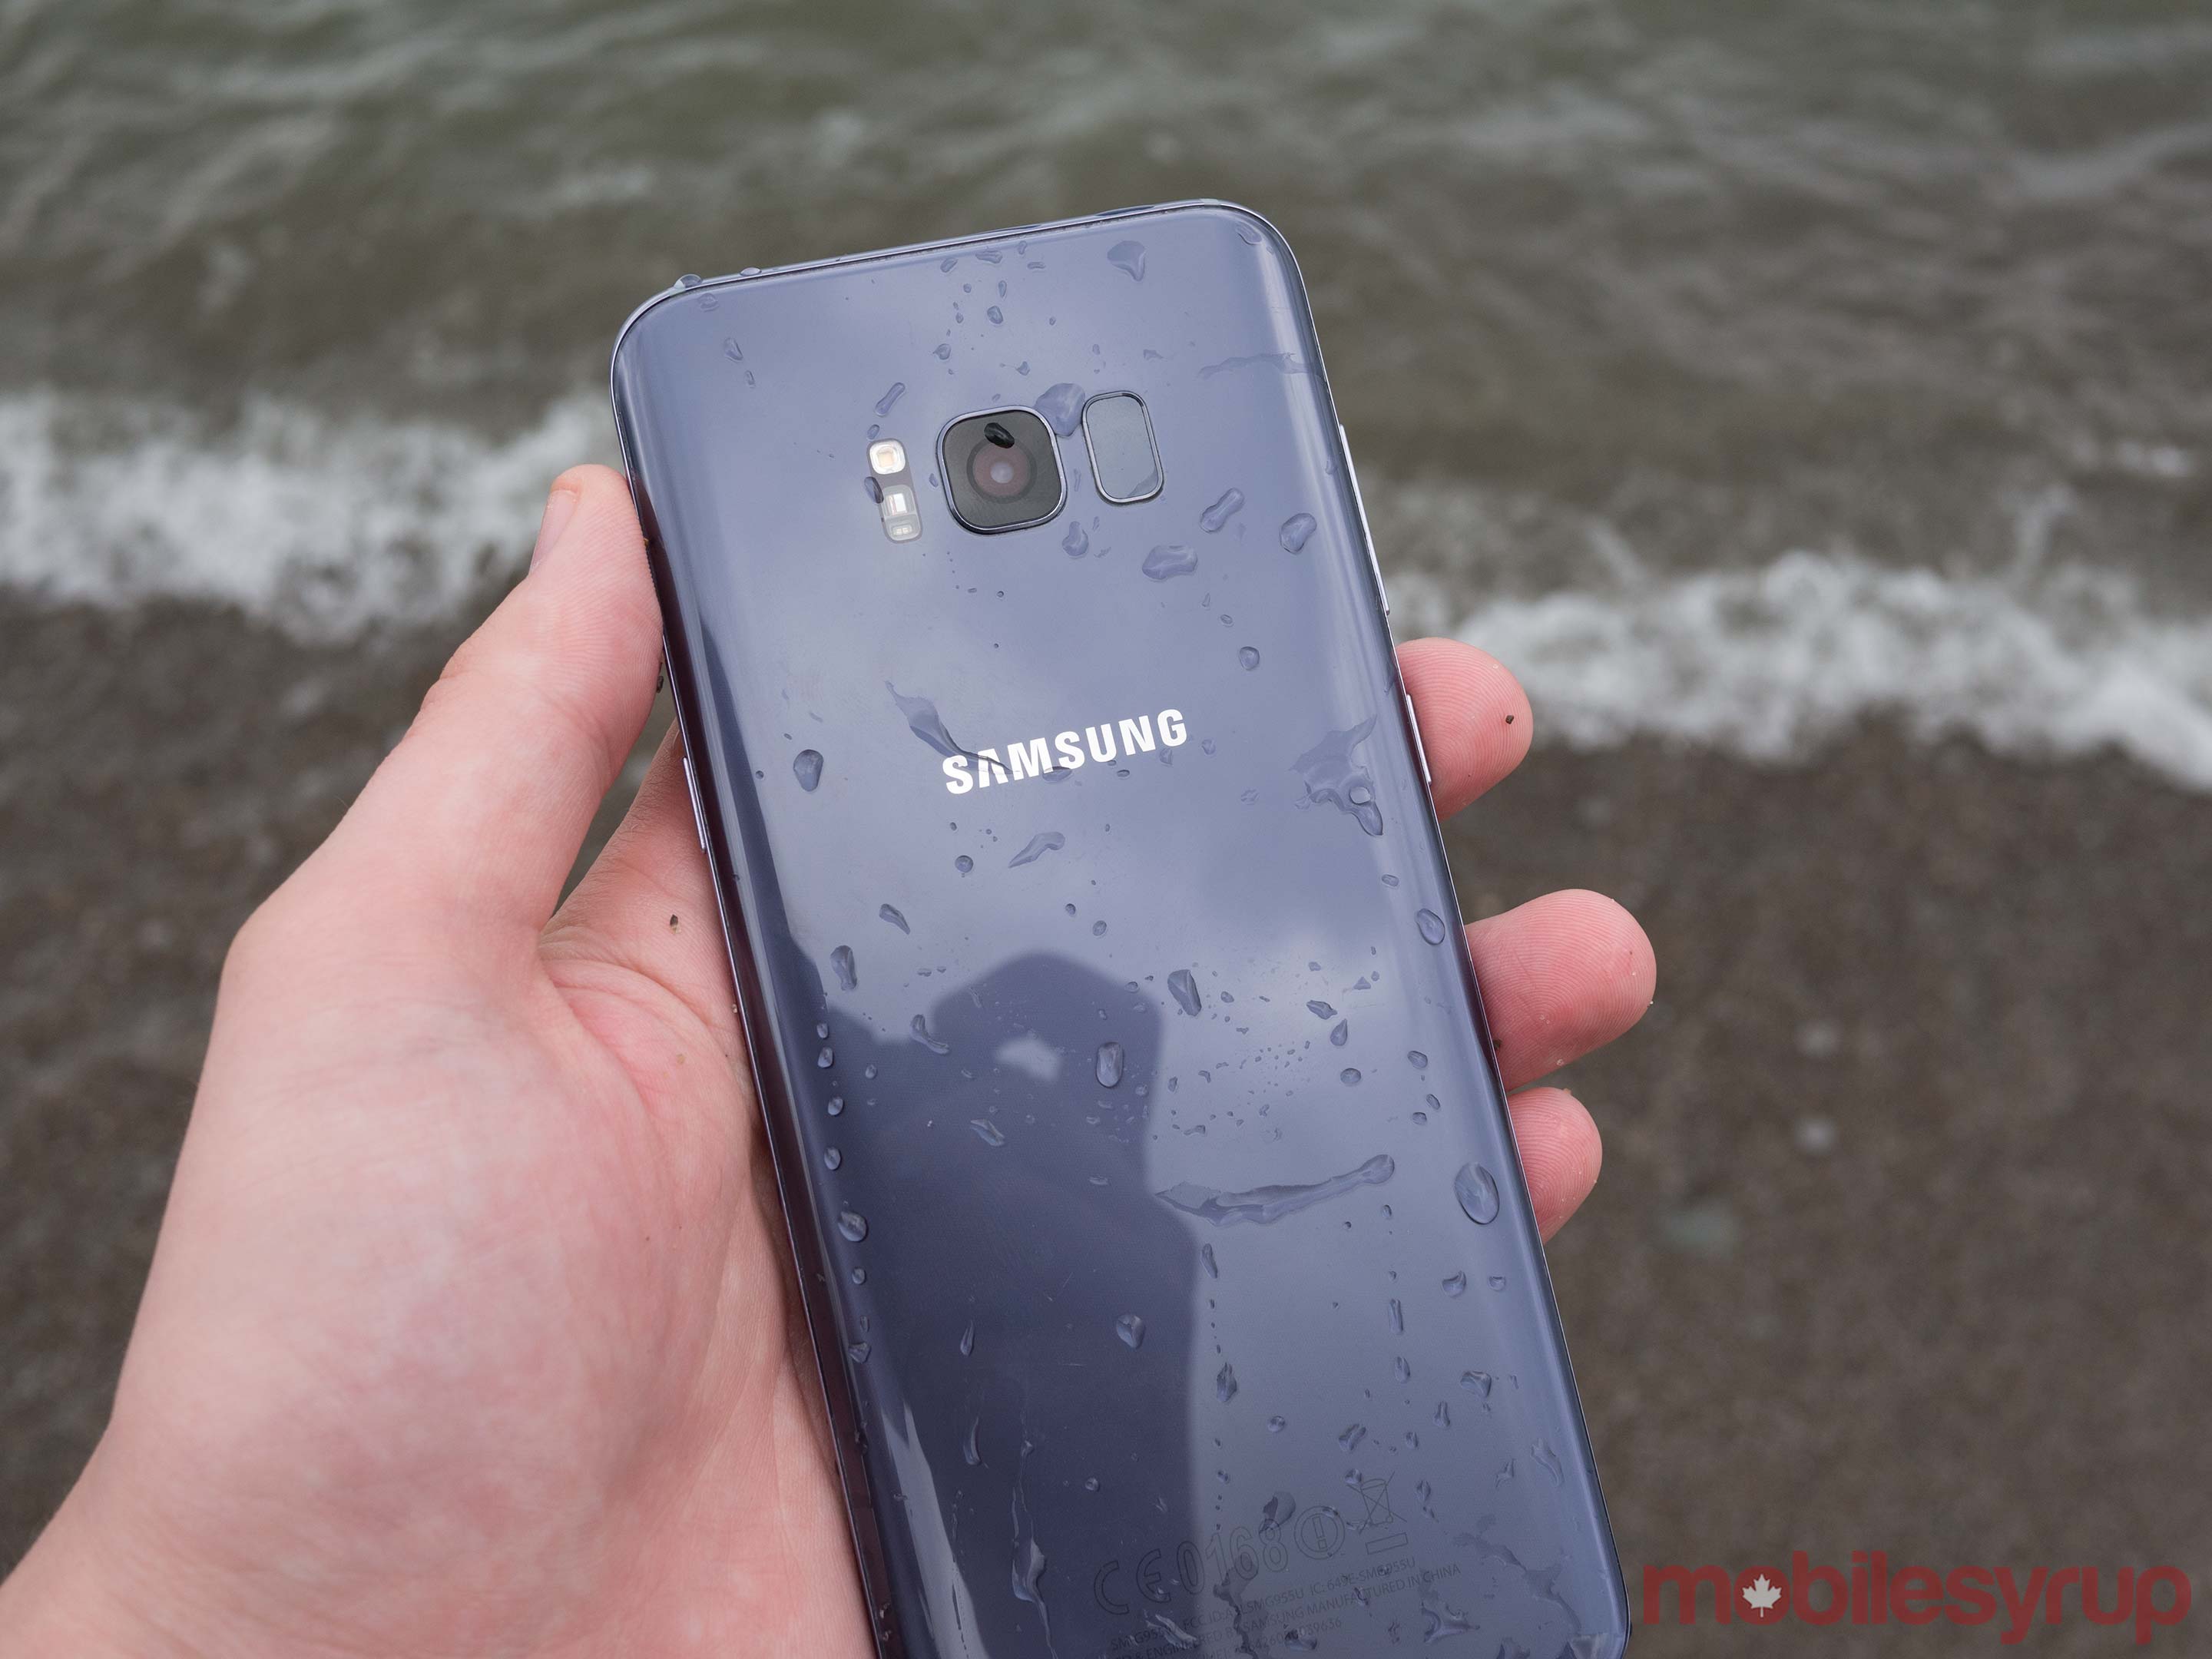 Galaxy S8 fingerprint sensor with water on the phone